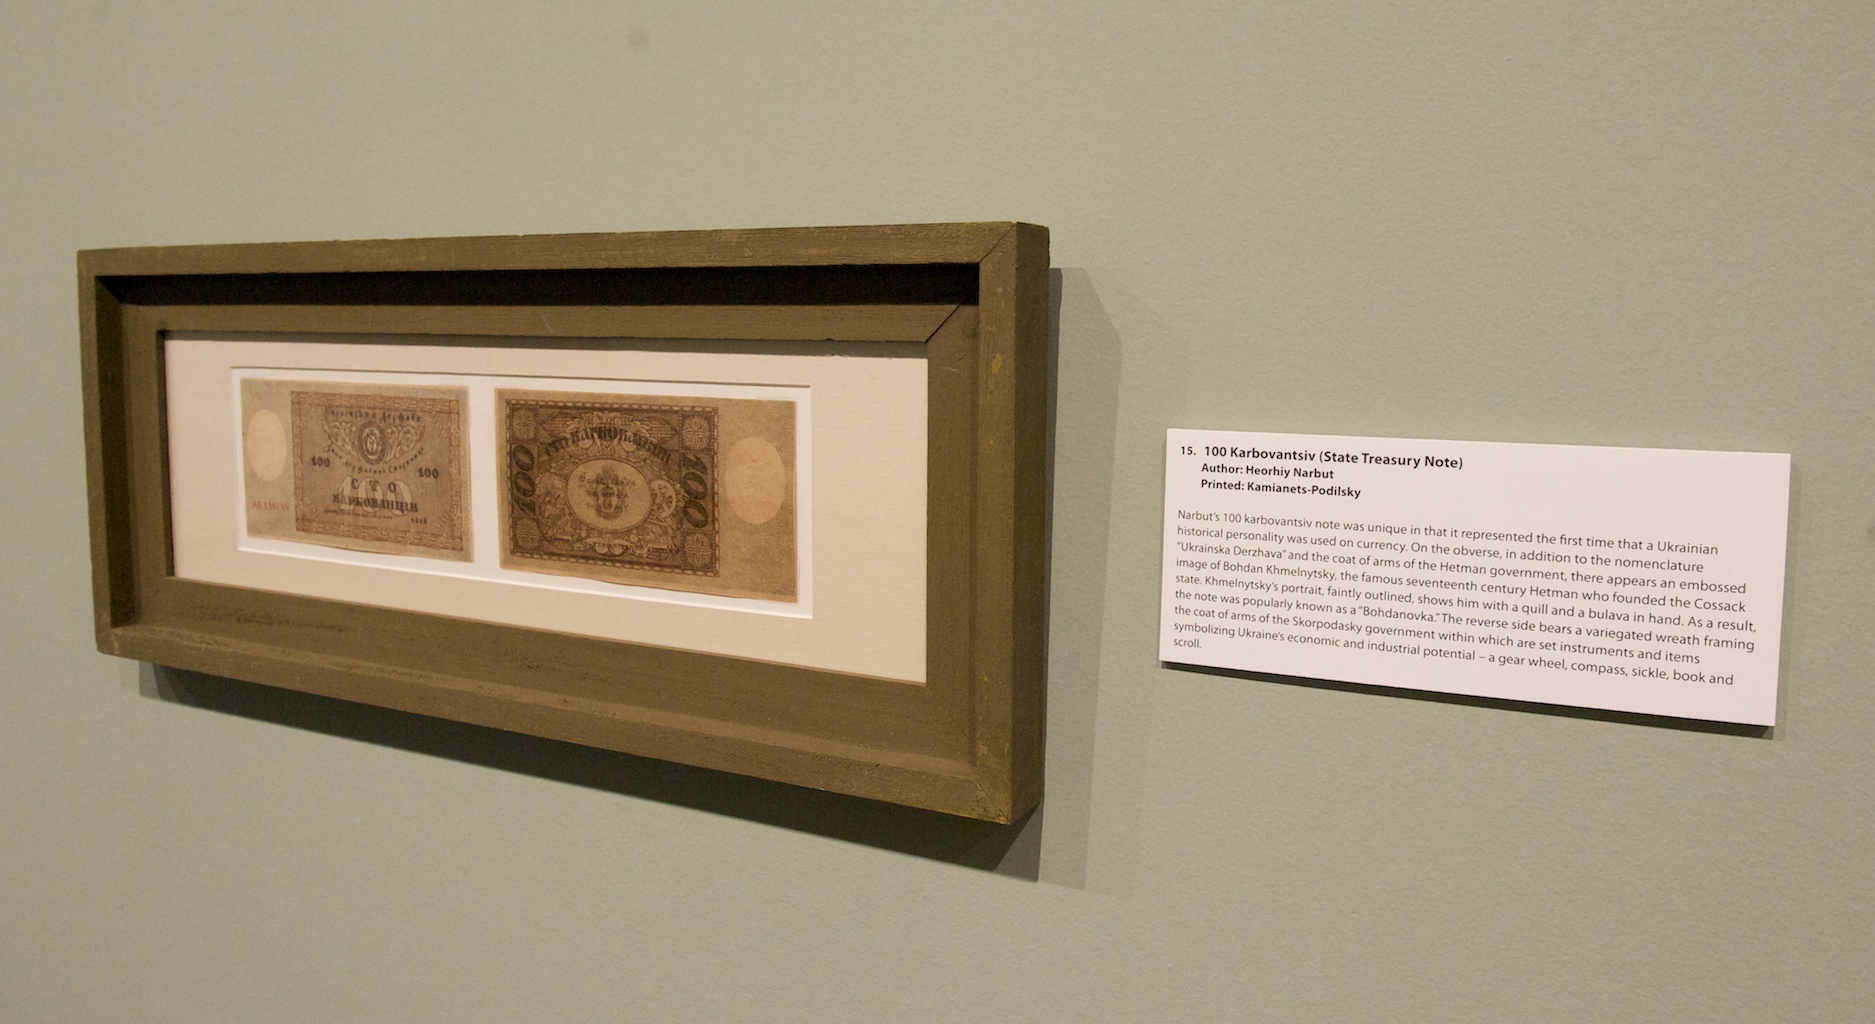 Money, Sovereignty and Power: The Paper Currency of Revolutionary Ukraine, 1917-1920 (Installation view). January 15, 2015 – April 4, 2015. Curated by Bohdan Kordan, Organized by The Prairie Centre for the Study of Ukrainian Heritage at the University of Saskatchewan in association with the Ukrainian Museum of Canada and Nickle Galleries.  Photo:  Dave Brown, LCR Photo Services.